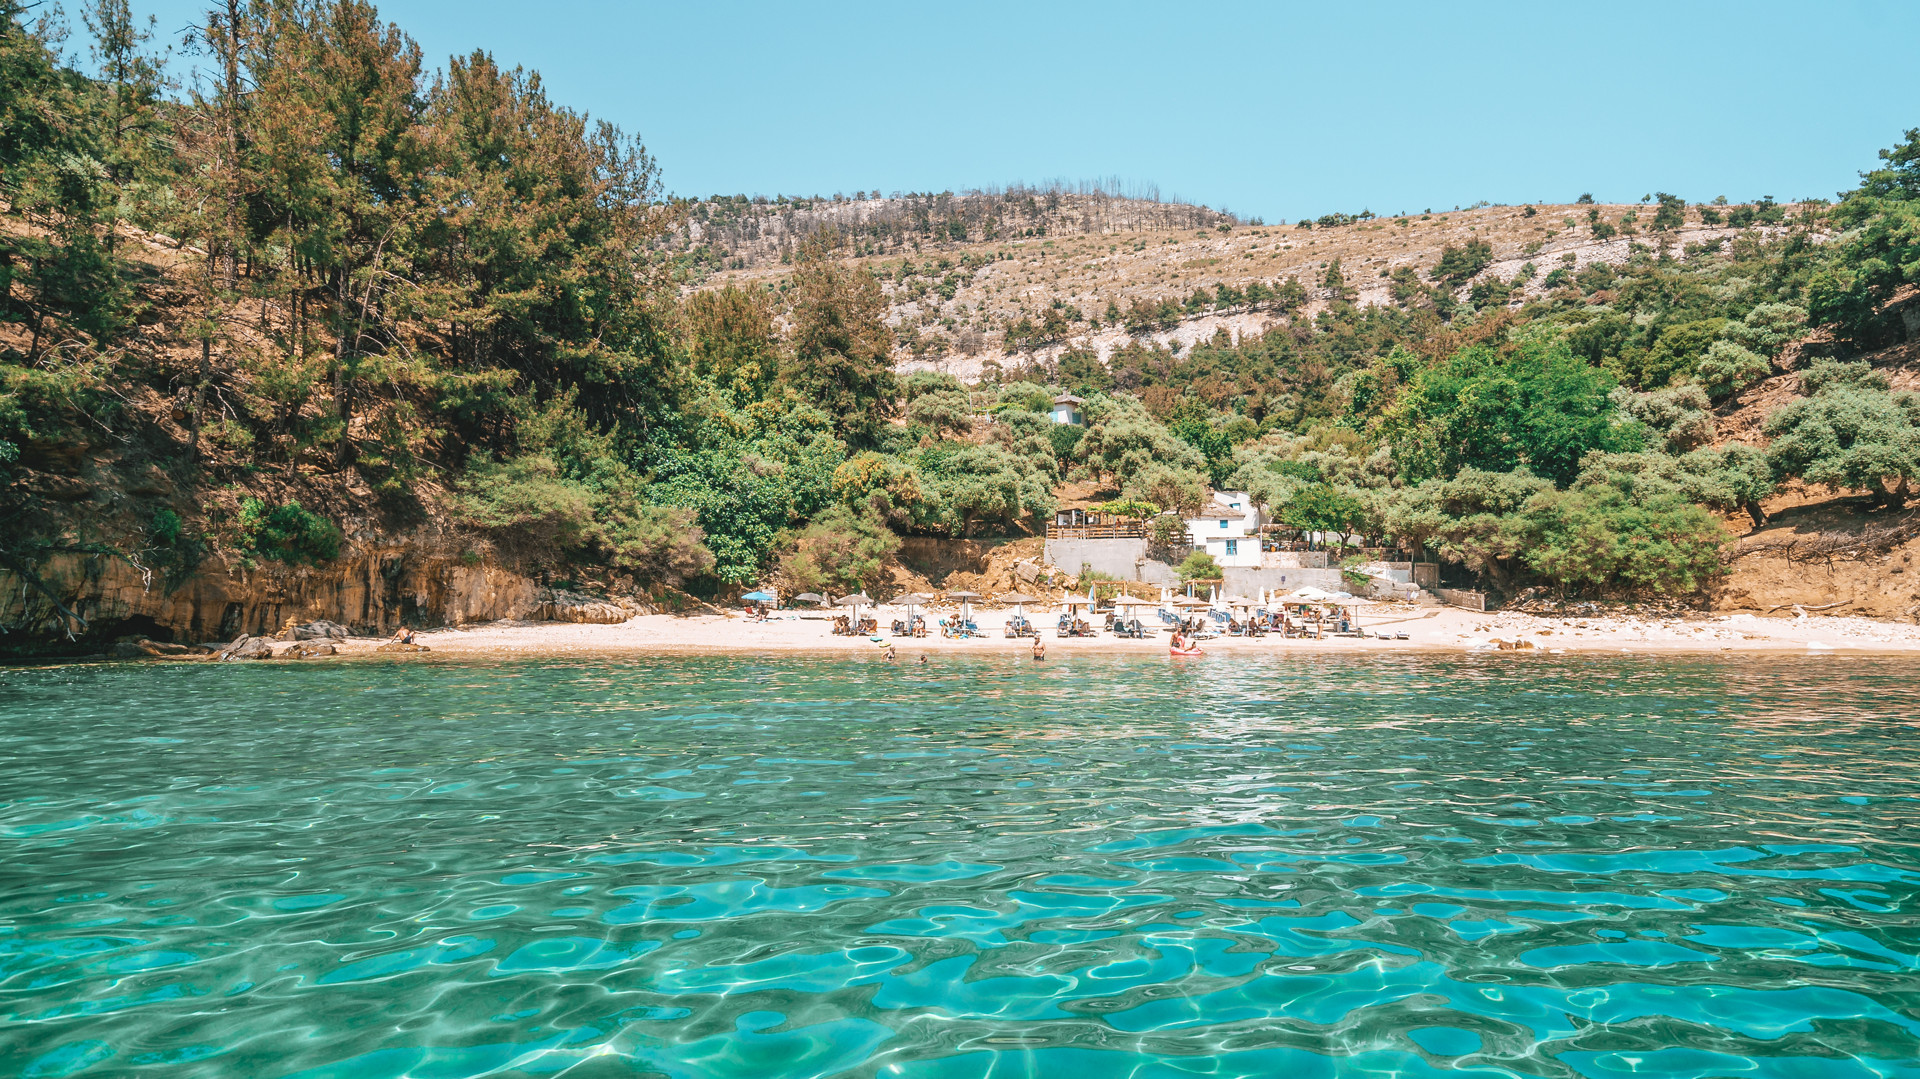 Arsanas beach sits in a tranquil cove in southern Thassos